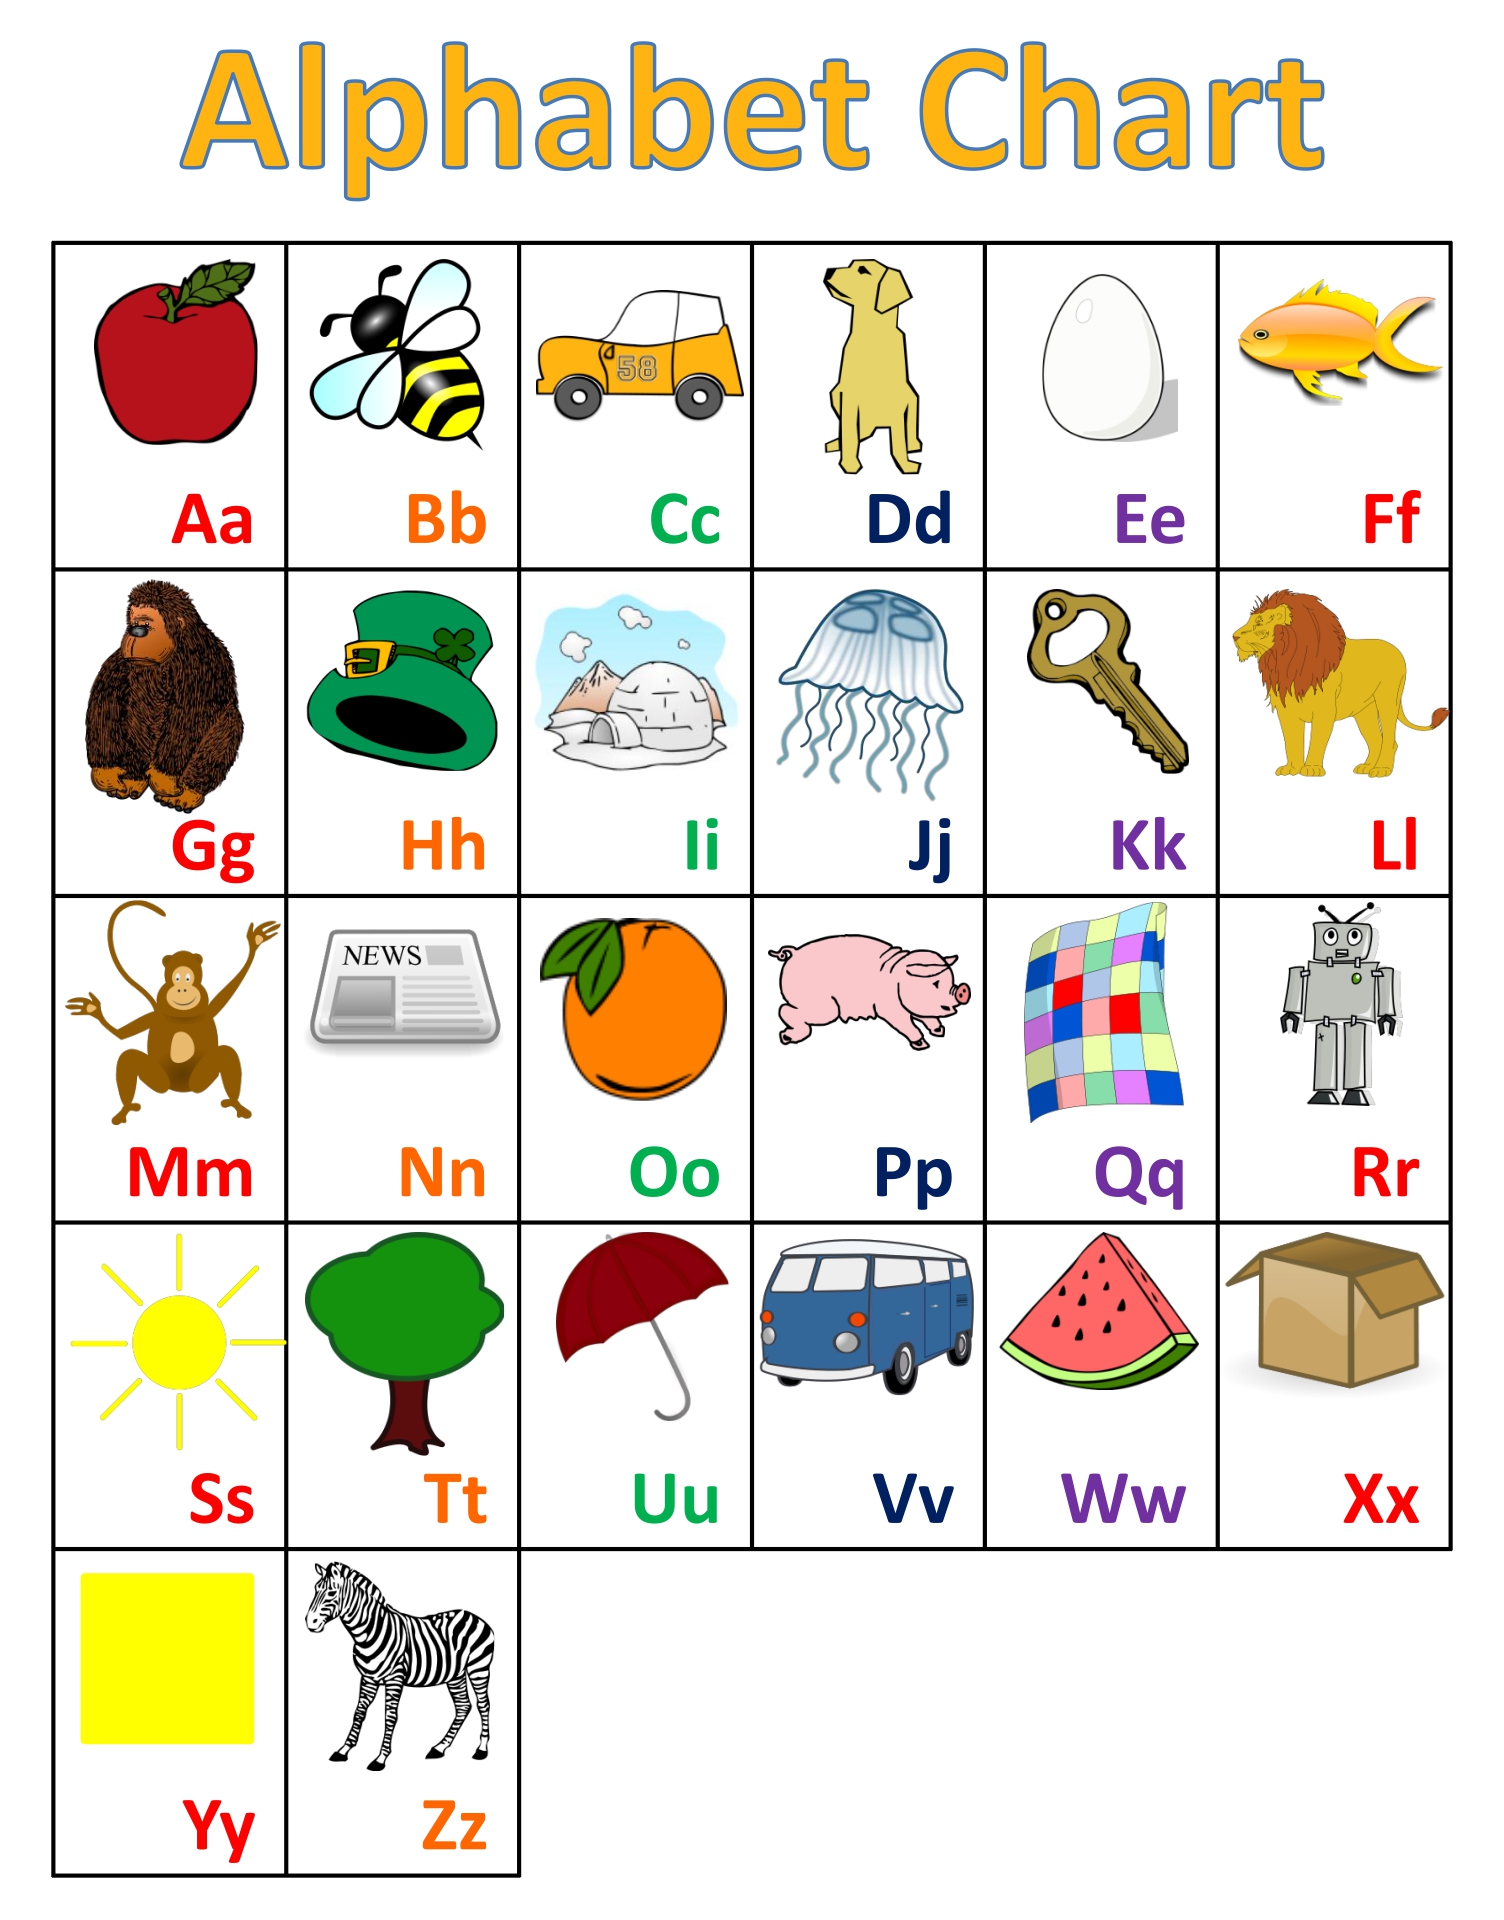 4-best-images-of-chart-full-page-alphabet-abc-printable-preschool-alphabet-chart-black-and